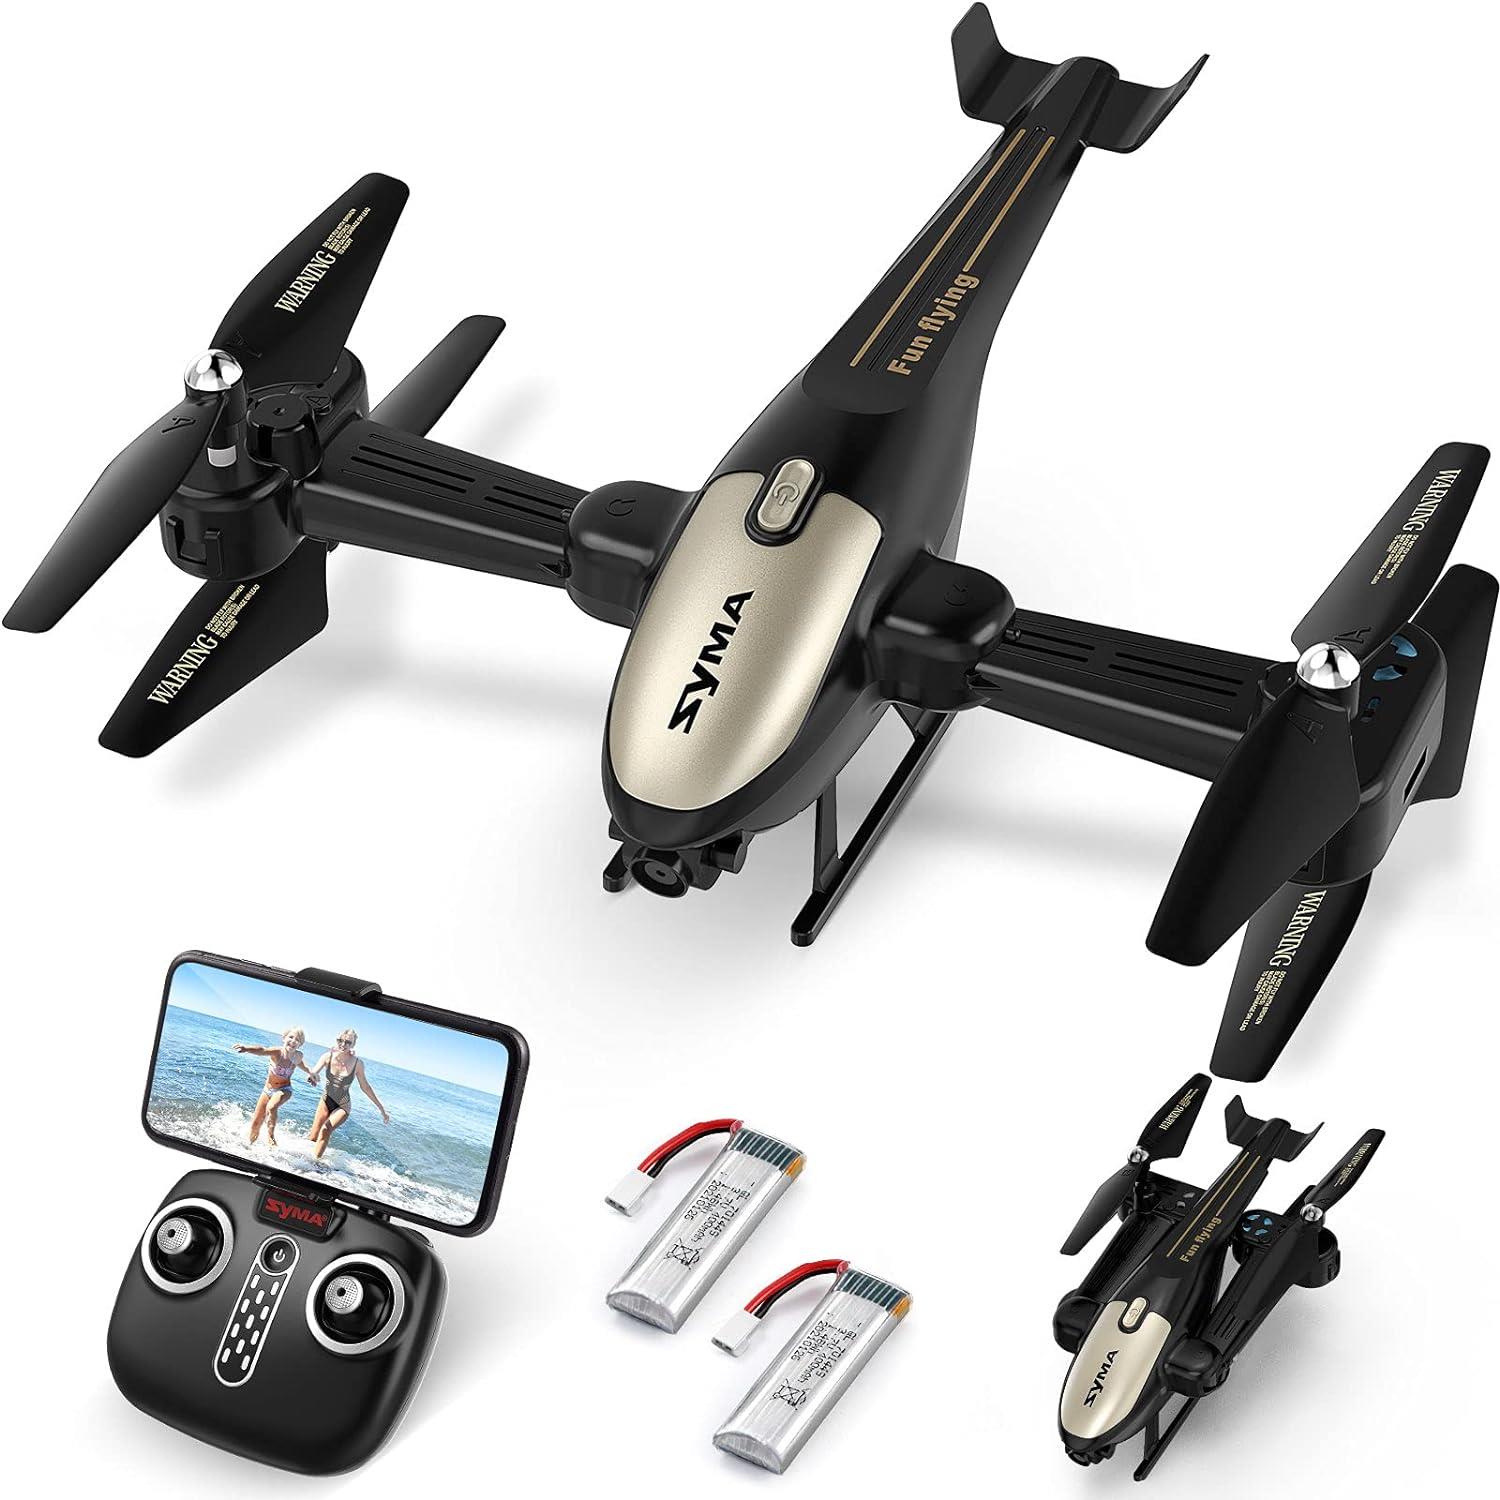 SYMA X700W Foldable Helicopter Drone from Bargain Max